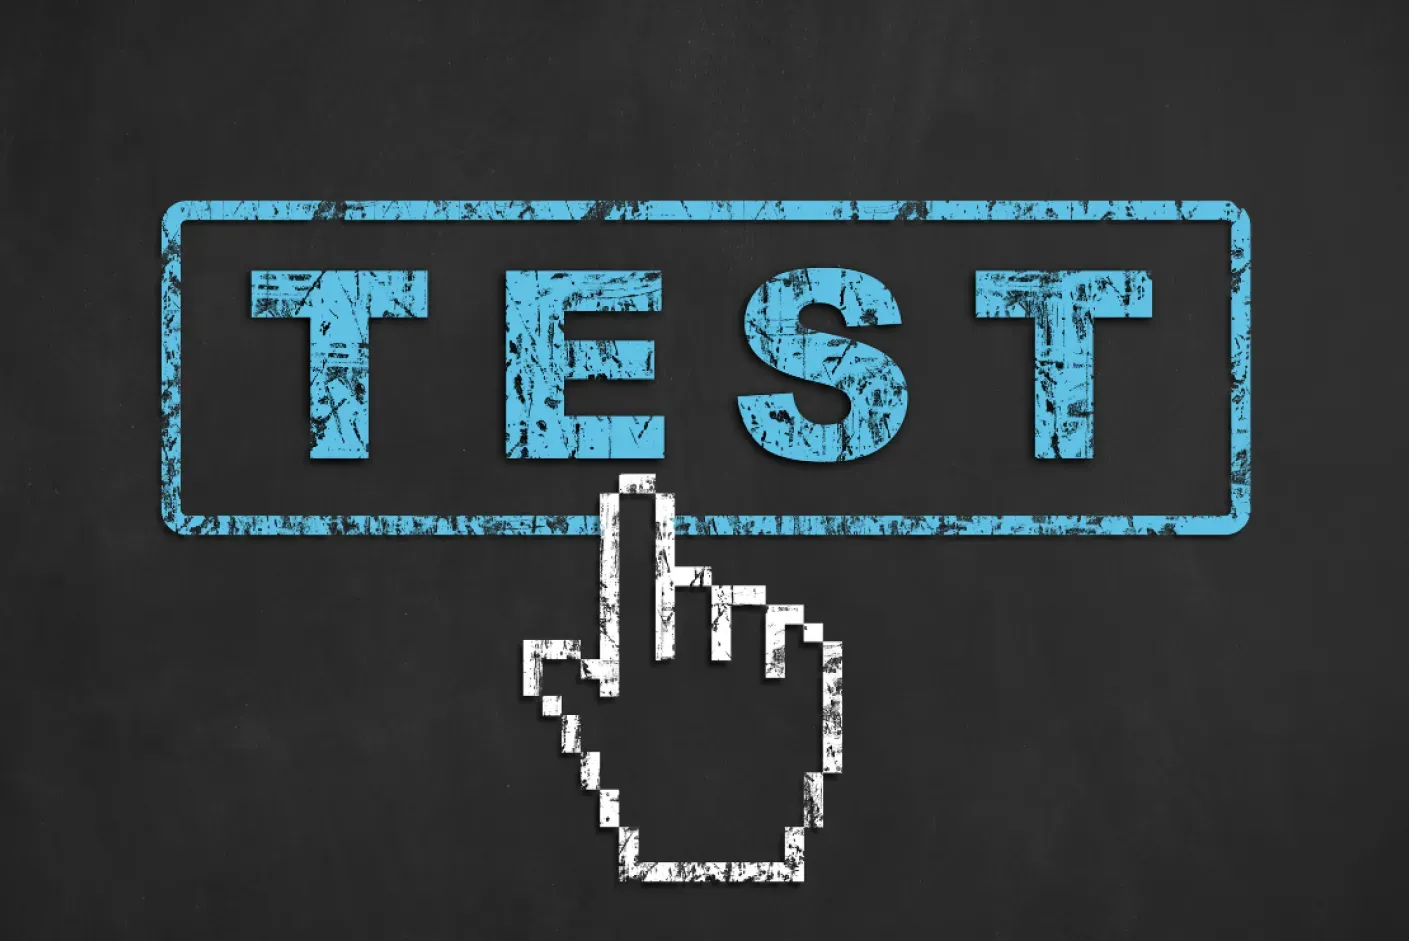 Army Cognitive Test practice - How to pass Army Cognitive Test